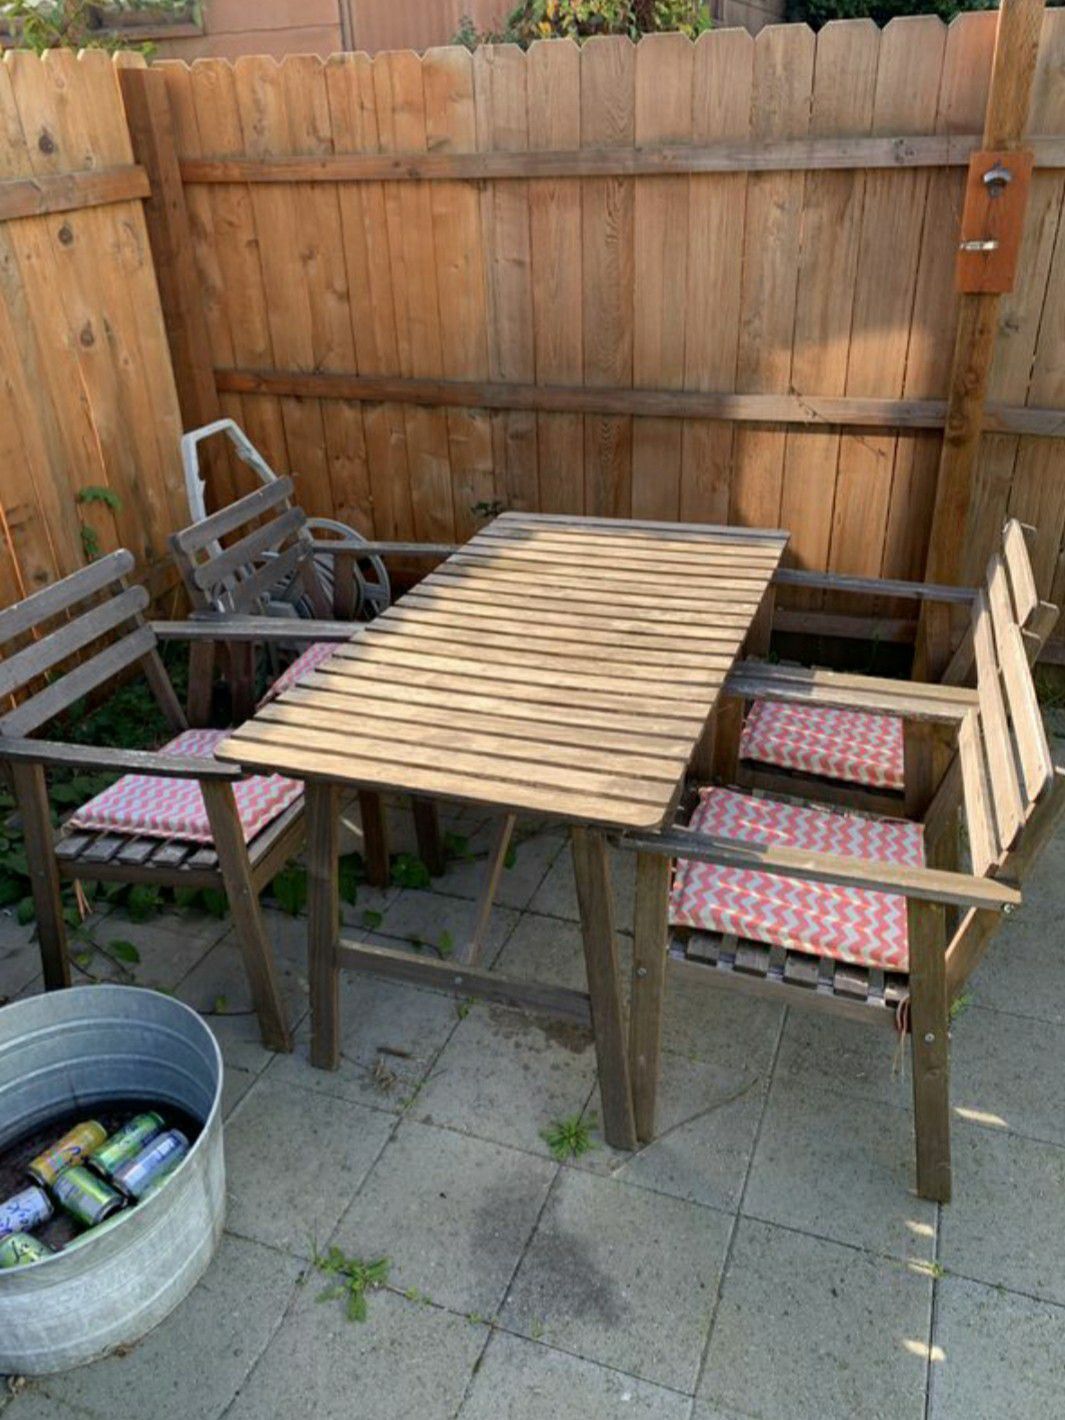 IKEA Outdoor Patio Table and Chairs